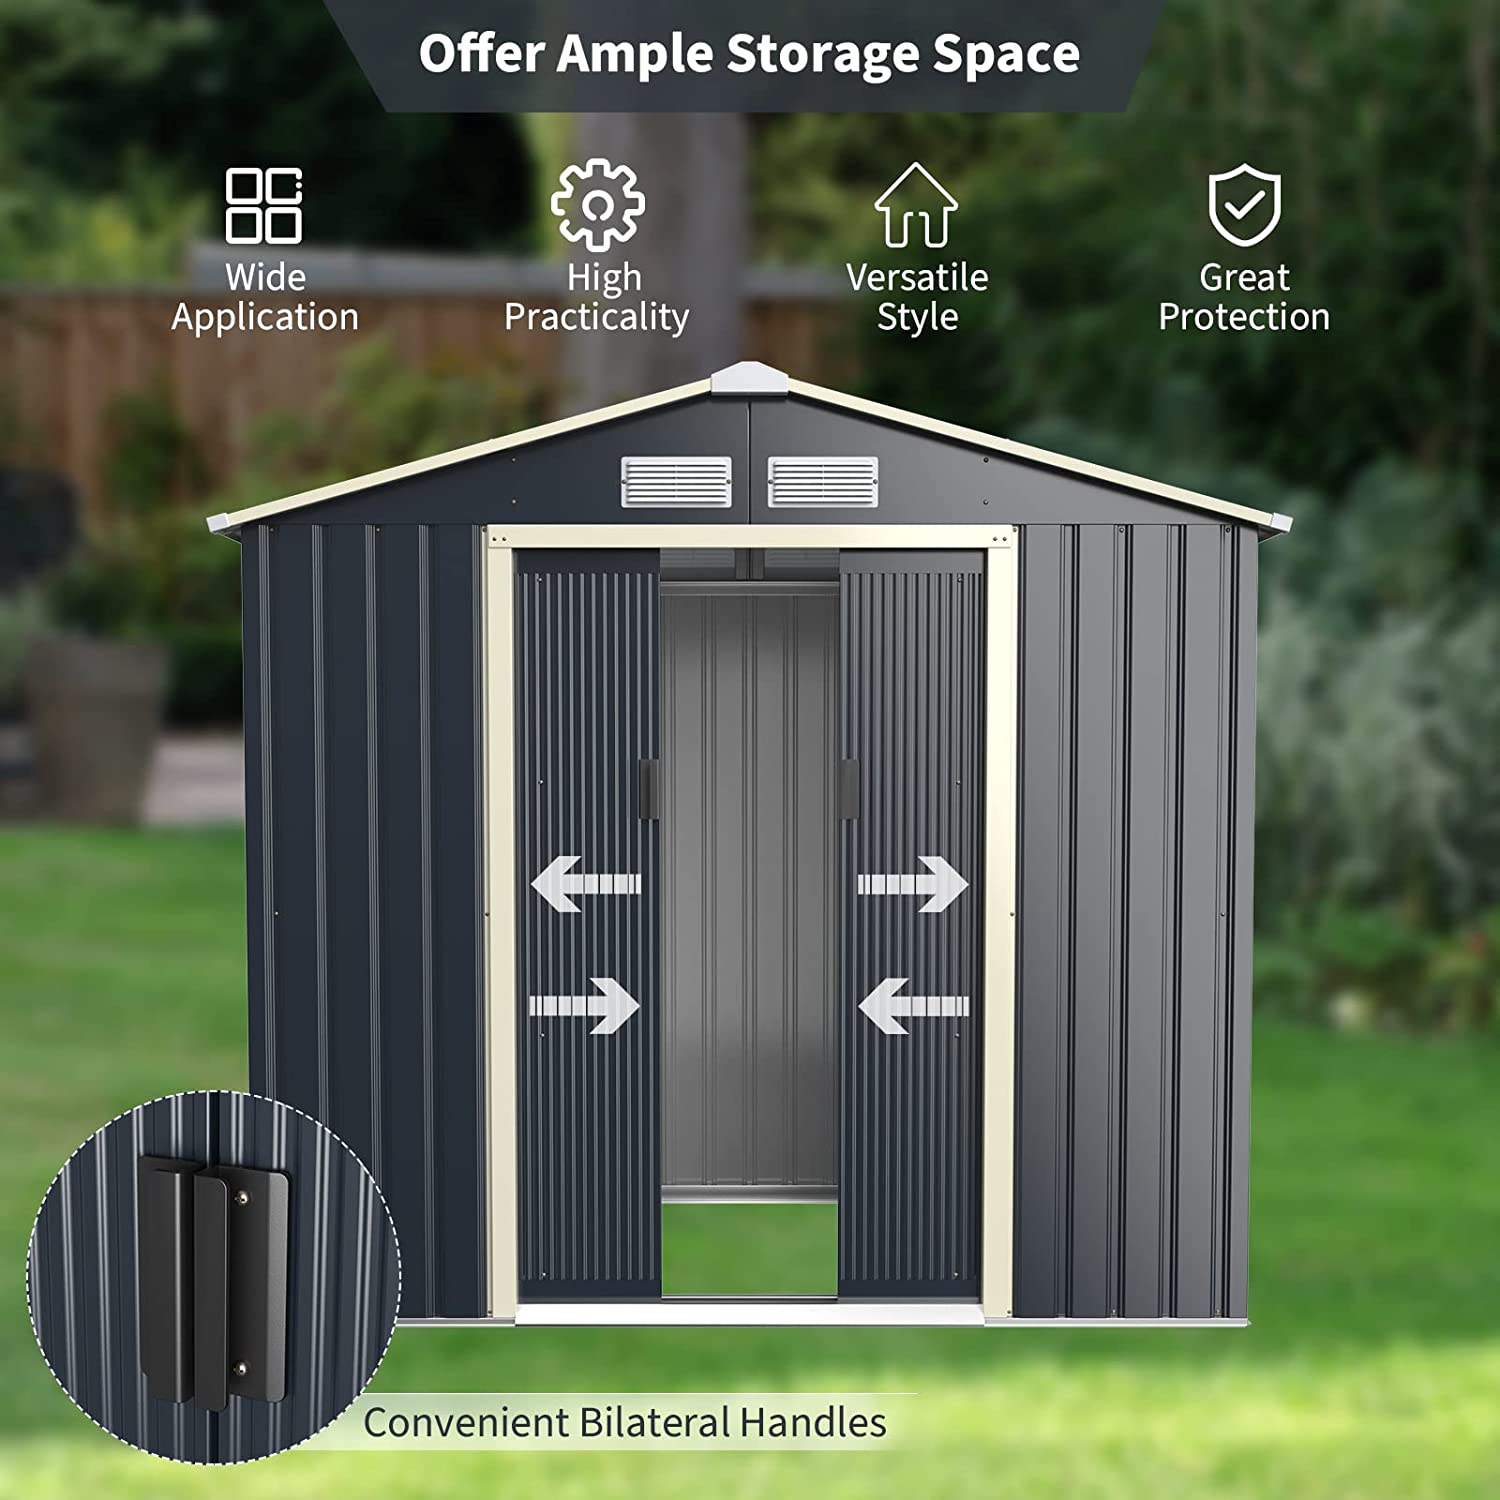 7’ x 4’ Outdoor Patio Metal Storage Shed, Building Organizer with Double Sliding Doors & 4 Vents for Garden Backyard Farm